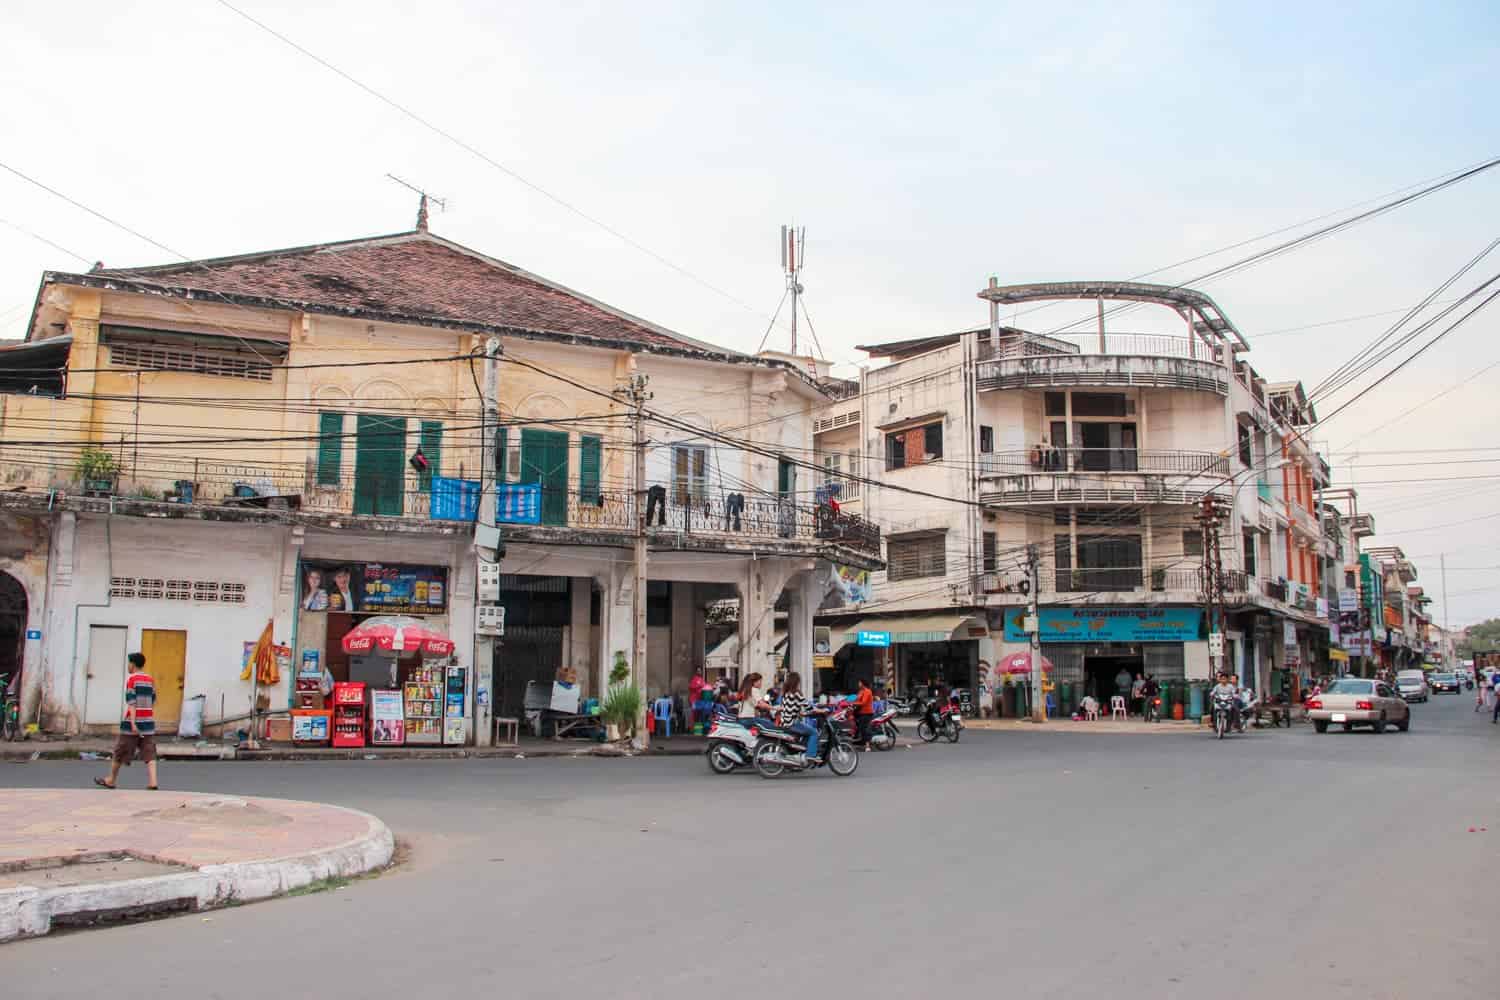 Town of Kampong Cham in Cambodia